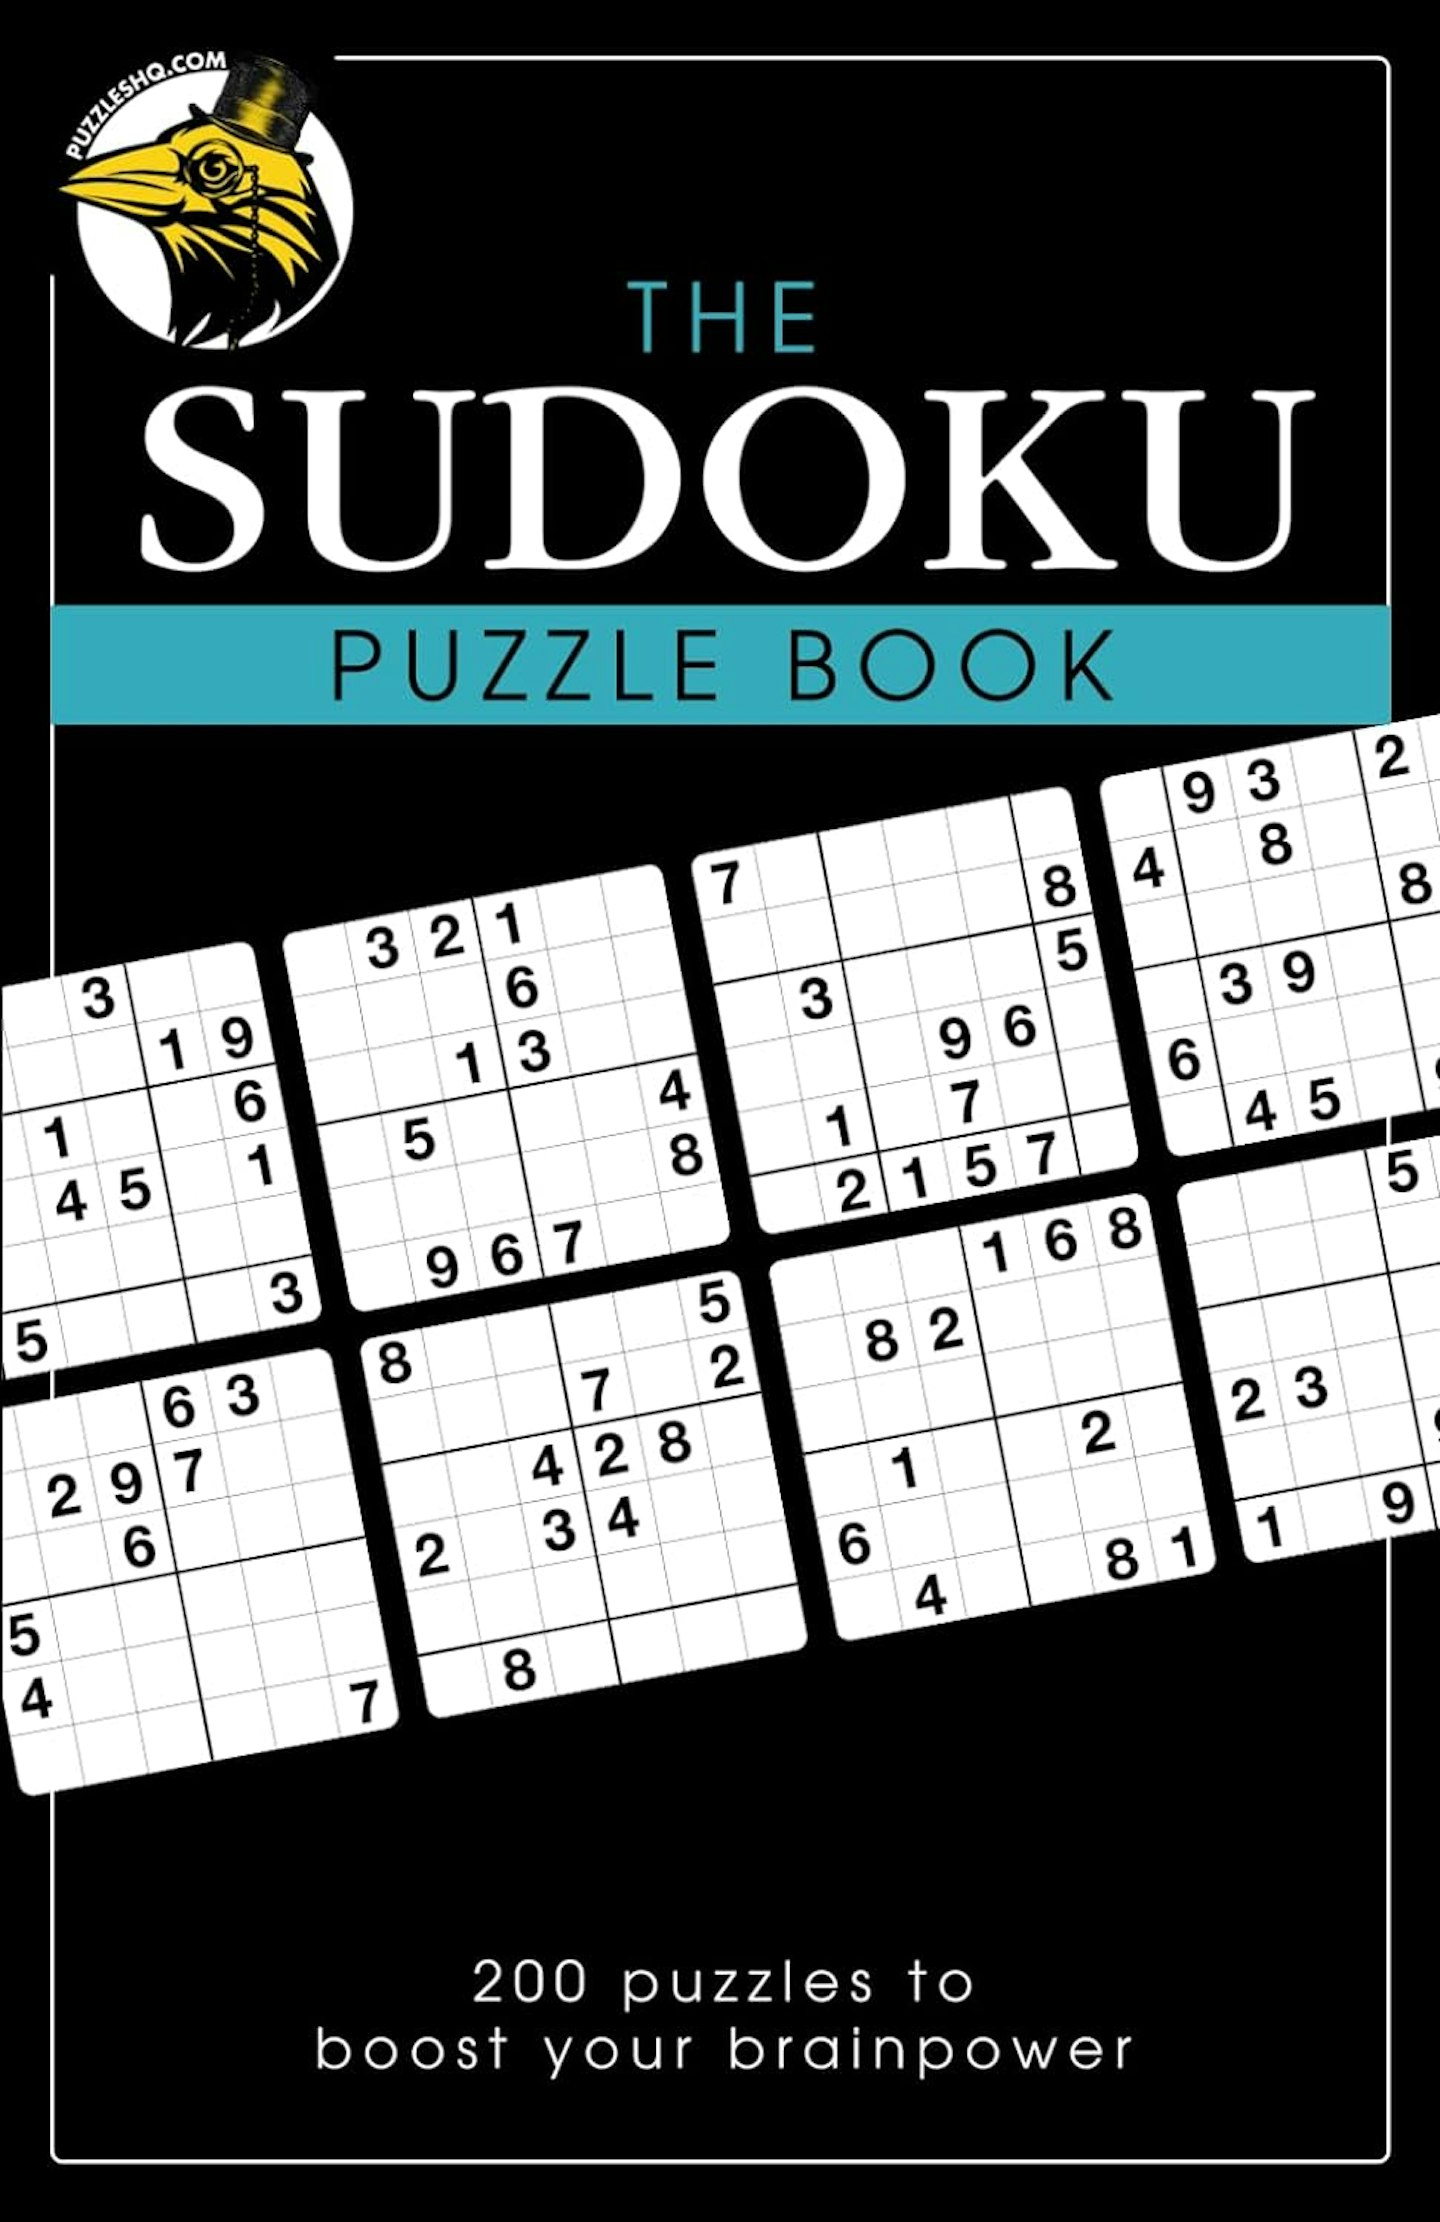 The Sudoku Puzzle Book cover